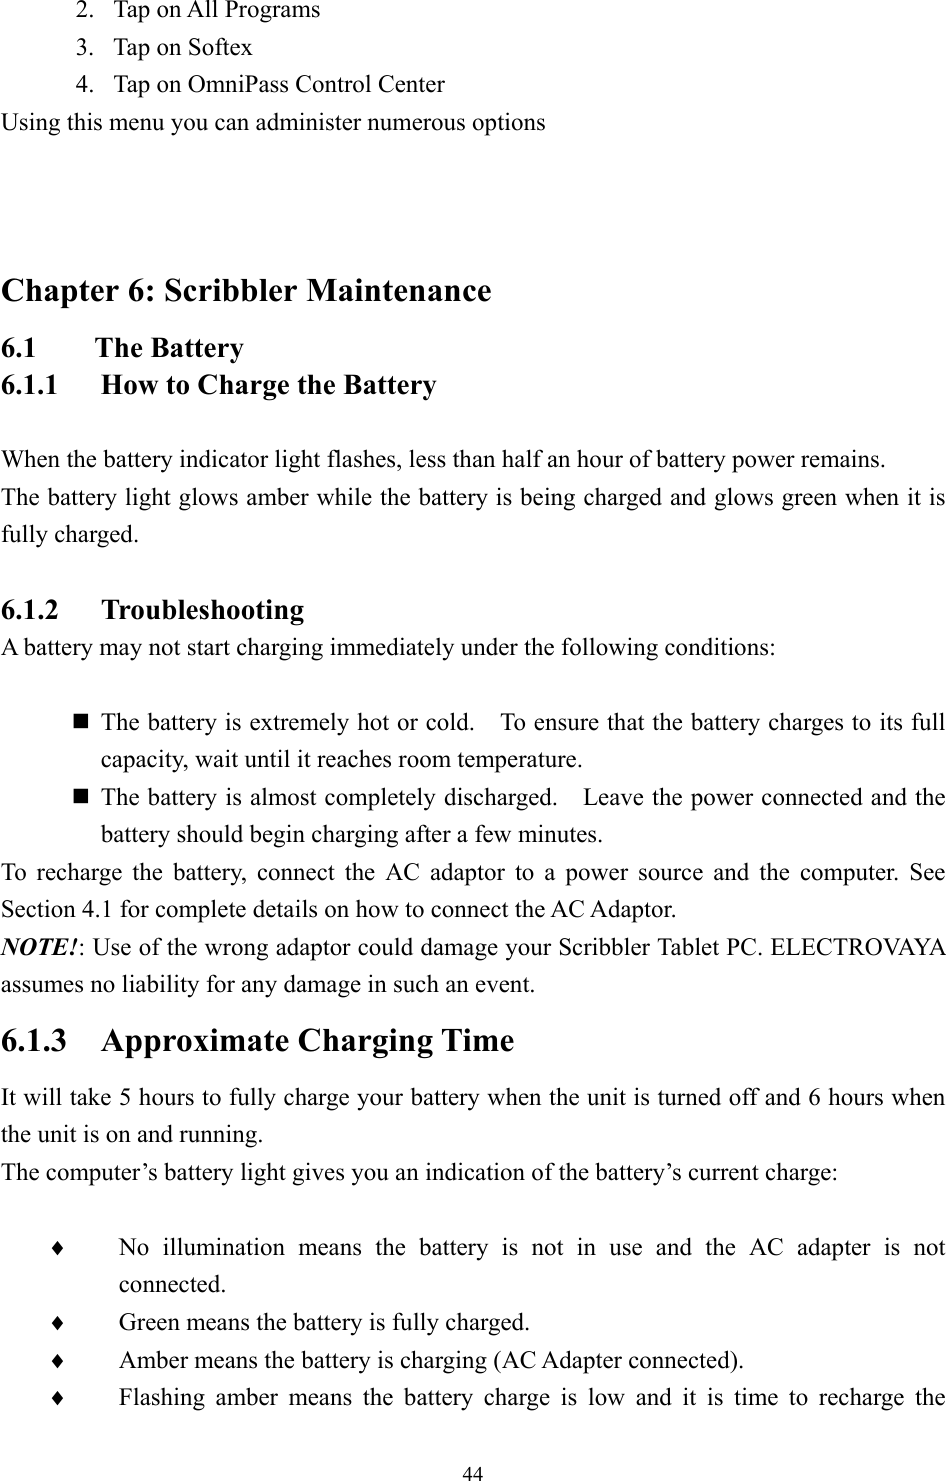 2.  Tap on All Programs 3.  Tap on Softex 4.  Tap on OmniPass Control Center Using this menu you can administer numerous options   Chapter 6: Scribbler Maintenance 6.1 The Battery 6.1.1  How to Charge the Battery  When the battery indicator light flashes, less than half an hour of battery power remains. The battery light glows amber while the battery is being charged and glows green when it is fully charged.  6.1.2 Troubleshooting A battery may not start charging immediately under the following conditions:   The battery is extremely hot or cold.    To ensure that the battery charges to its full capacity, wait until it reaches room temperature.  The battery is almost completely discharged.    Leave the power connected and the battery should begin charging after a few minutes. To recharge the battery, connect the AC adaptor to a power source and the computer. See Section 4.1 for complete details on how to connect the AC Adaptor. NOTE!: Use of the wrong adaptor could damage your Scribbler Tablet PC. ELECTROVAYA assumes no liability for any damage in such an event. 6.1.3 Approximate Charging Time It will take 5 hours to fully charge your battery when the unit is turned off and 6 hours when the unit is on and running.   The computer’s battery light gives you an indication of the battery’s current charge:  No illumination means the battery is not in use and the AC adapter is not connected. ♦ ♦ ♦ ♦ Green means the battery is fully charged. Amber means the battery is charging (AC Adapter connected). Flashing amber means the battery charge is low and it is time to recharge the  44